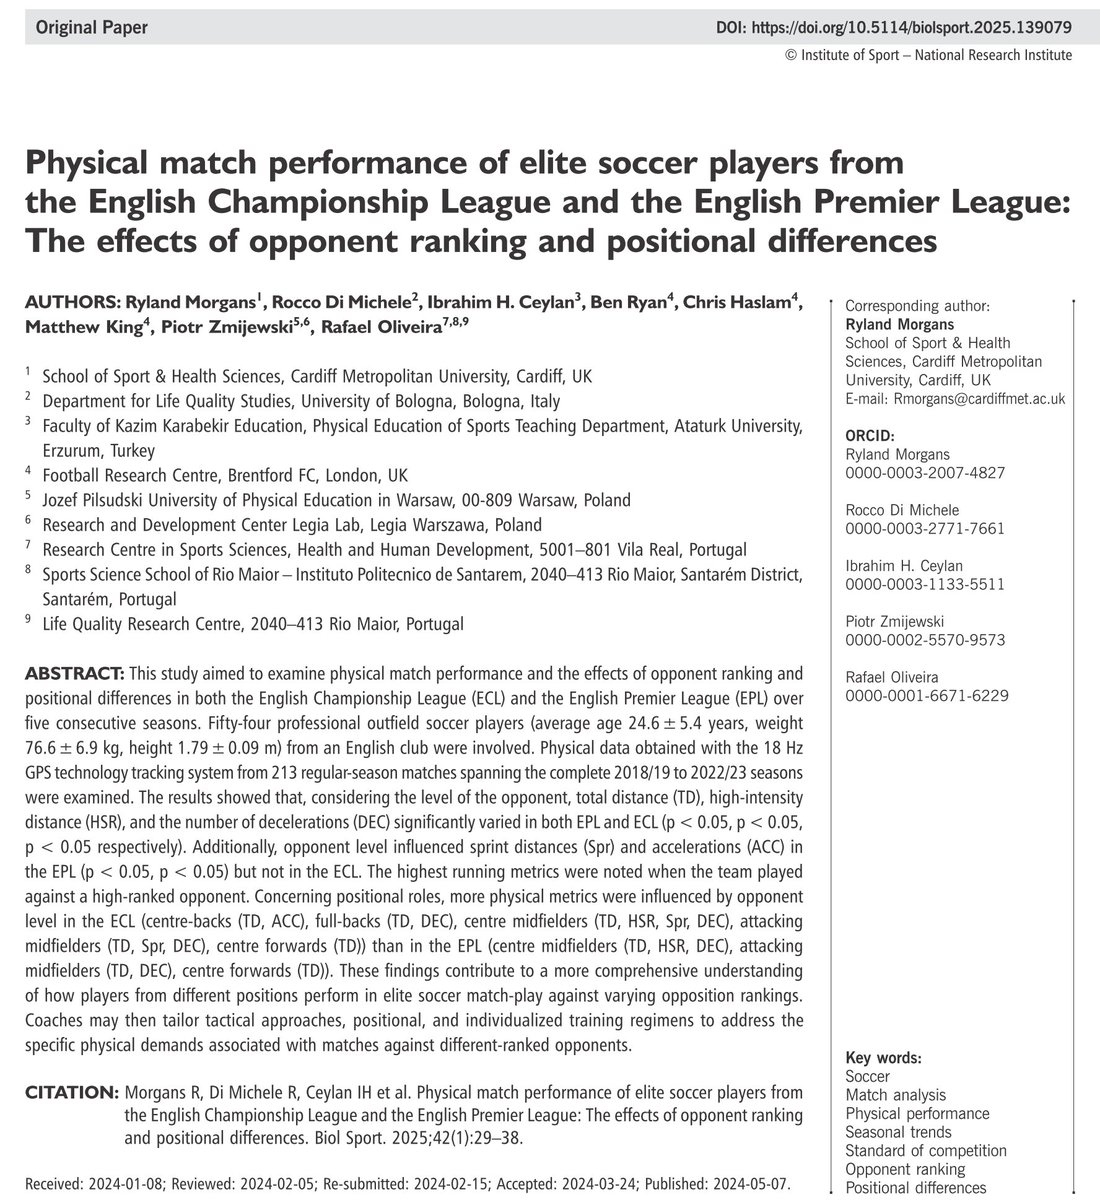 🚨👉Physical match performance and the effects of opponent ranking and positional differences in the English Championship League and the English Premier League over 5⃣ seasons ⚽️🏴󠁧󠁢󠁥󠁮󠁧󠁿 ✍️Ryland Morgans, Rocco Di Michele, Ibrahim H. Ceylan et al. 🔓#OpenAccess🔗termedia.pl/Physical-match…